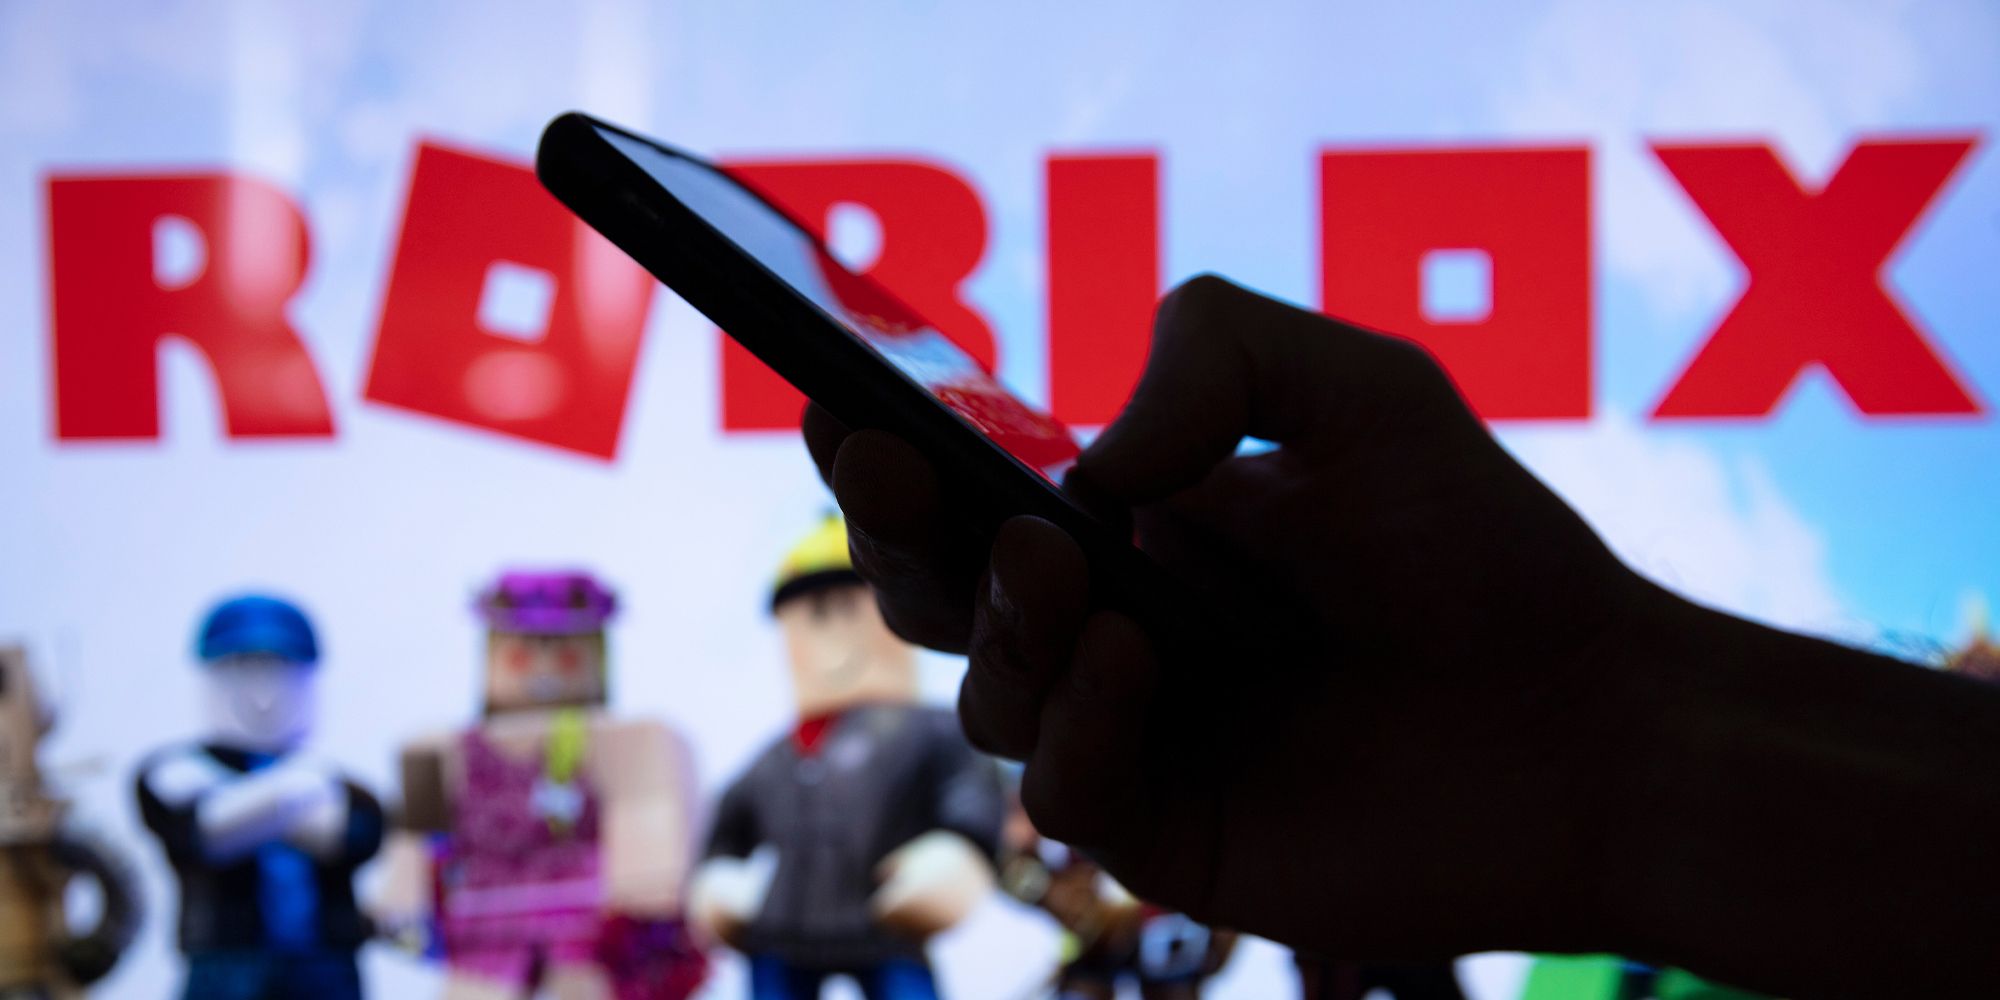 Roblox logo with a silhouetted hand holding a phone, it looks ominous